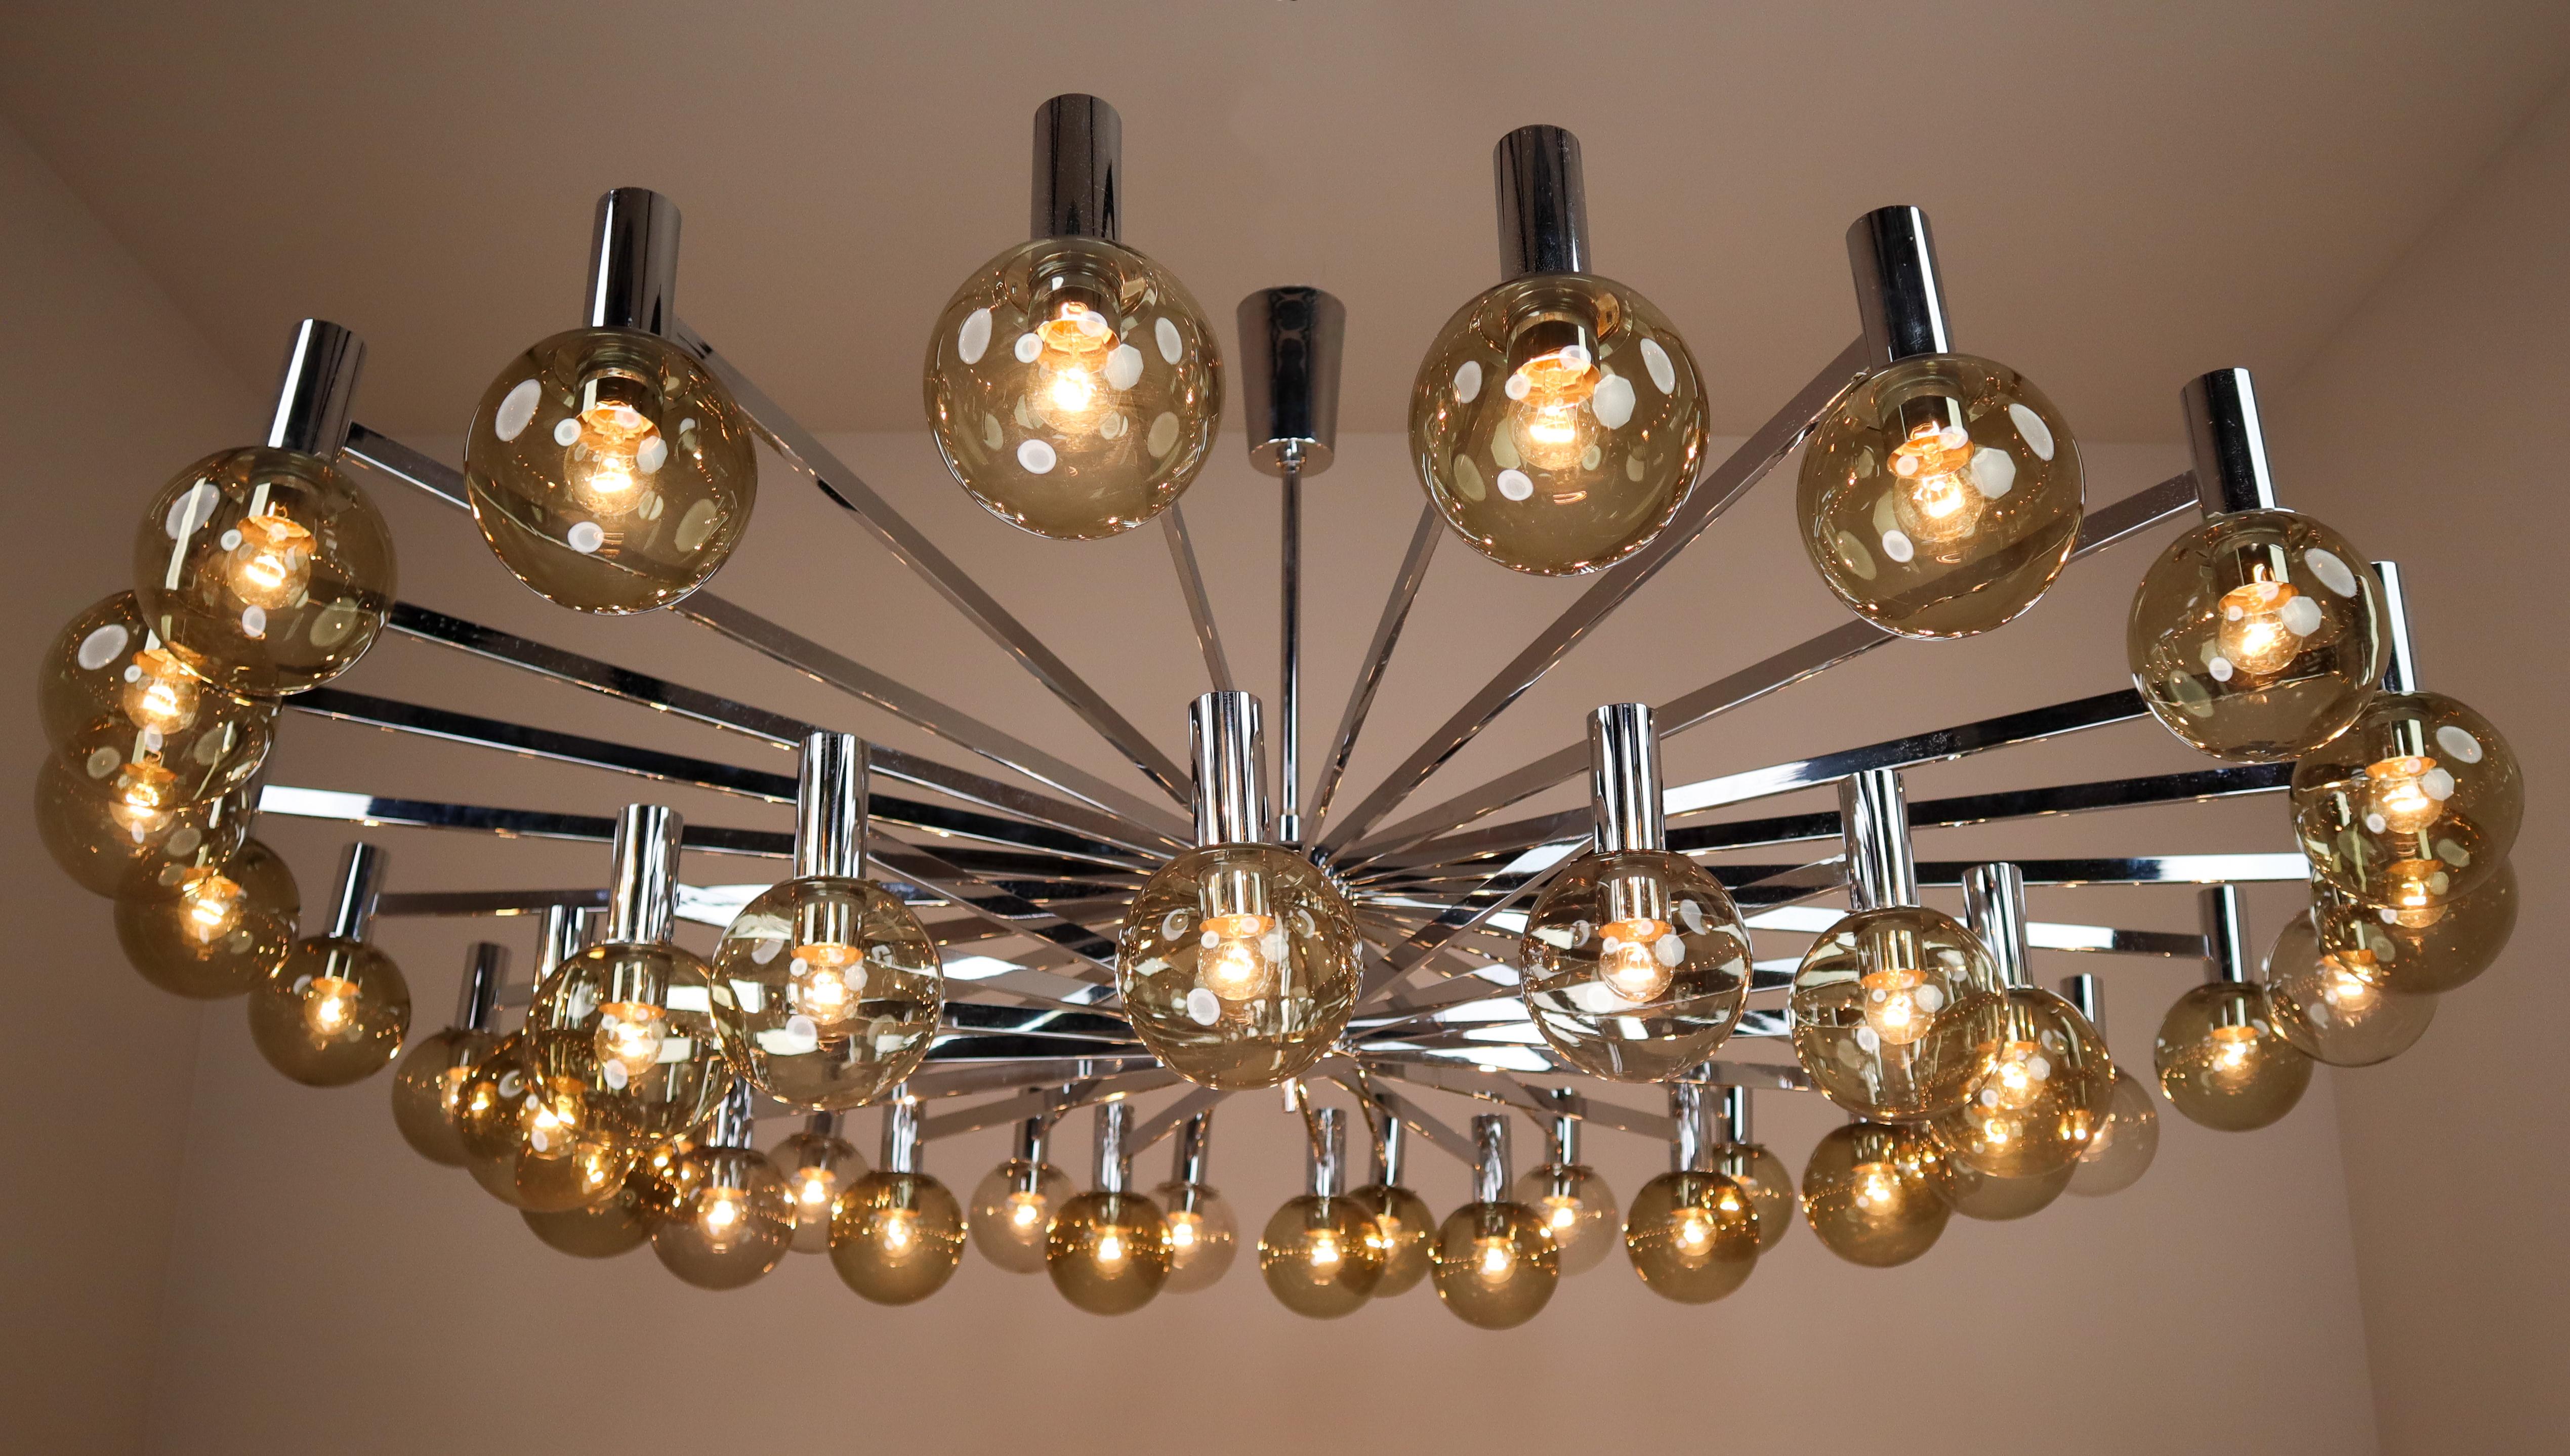 This elegant XXL large chrome chandelier of the 1970s is produced in Italy. The pleasant light it spreads is very atmospheric, these large chandelier contribute to a luxurious character of the interior. Size: Diameter 220 cm. High quality